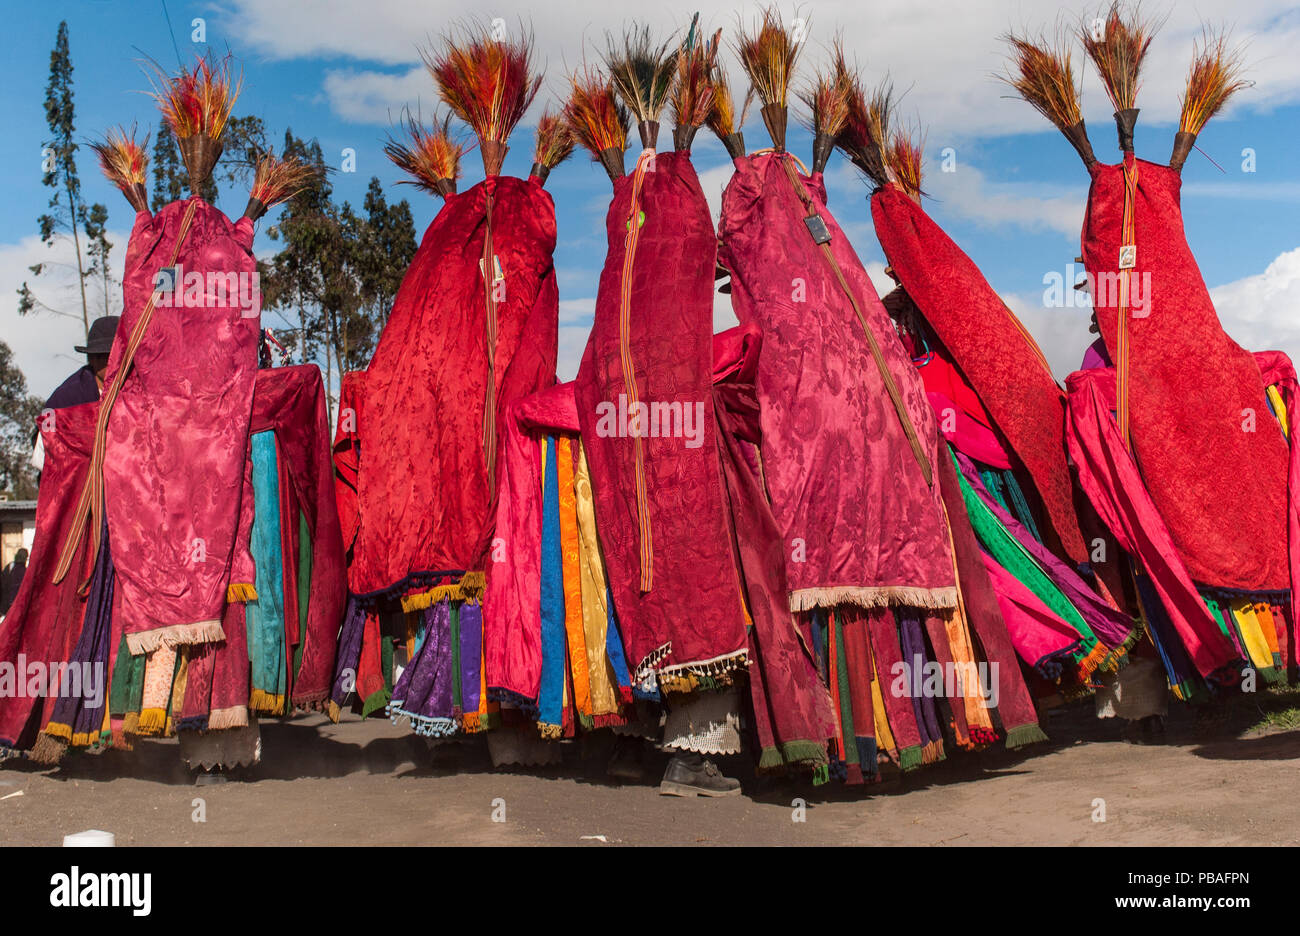 Indigenous Salasaca Indians in colourful garments, celebrating the Inti Raymi festival - or Festival of the Sun, Salasaca, Andes, Ecuador, June 2004. Stock Photo